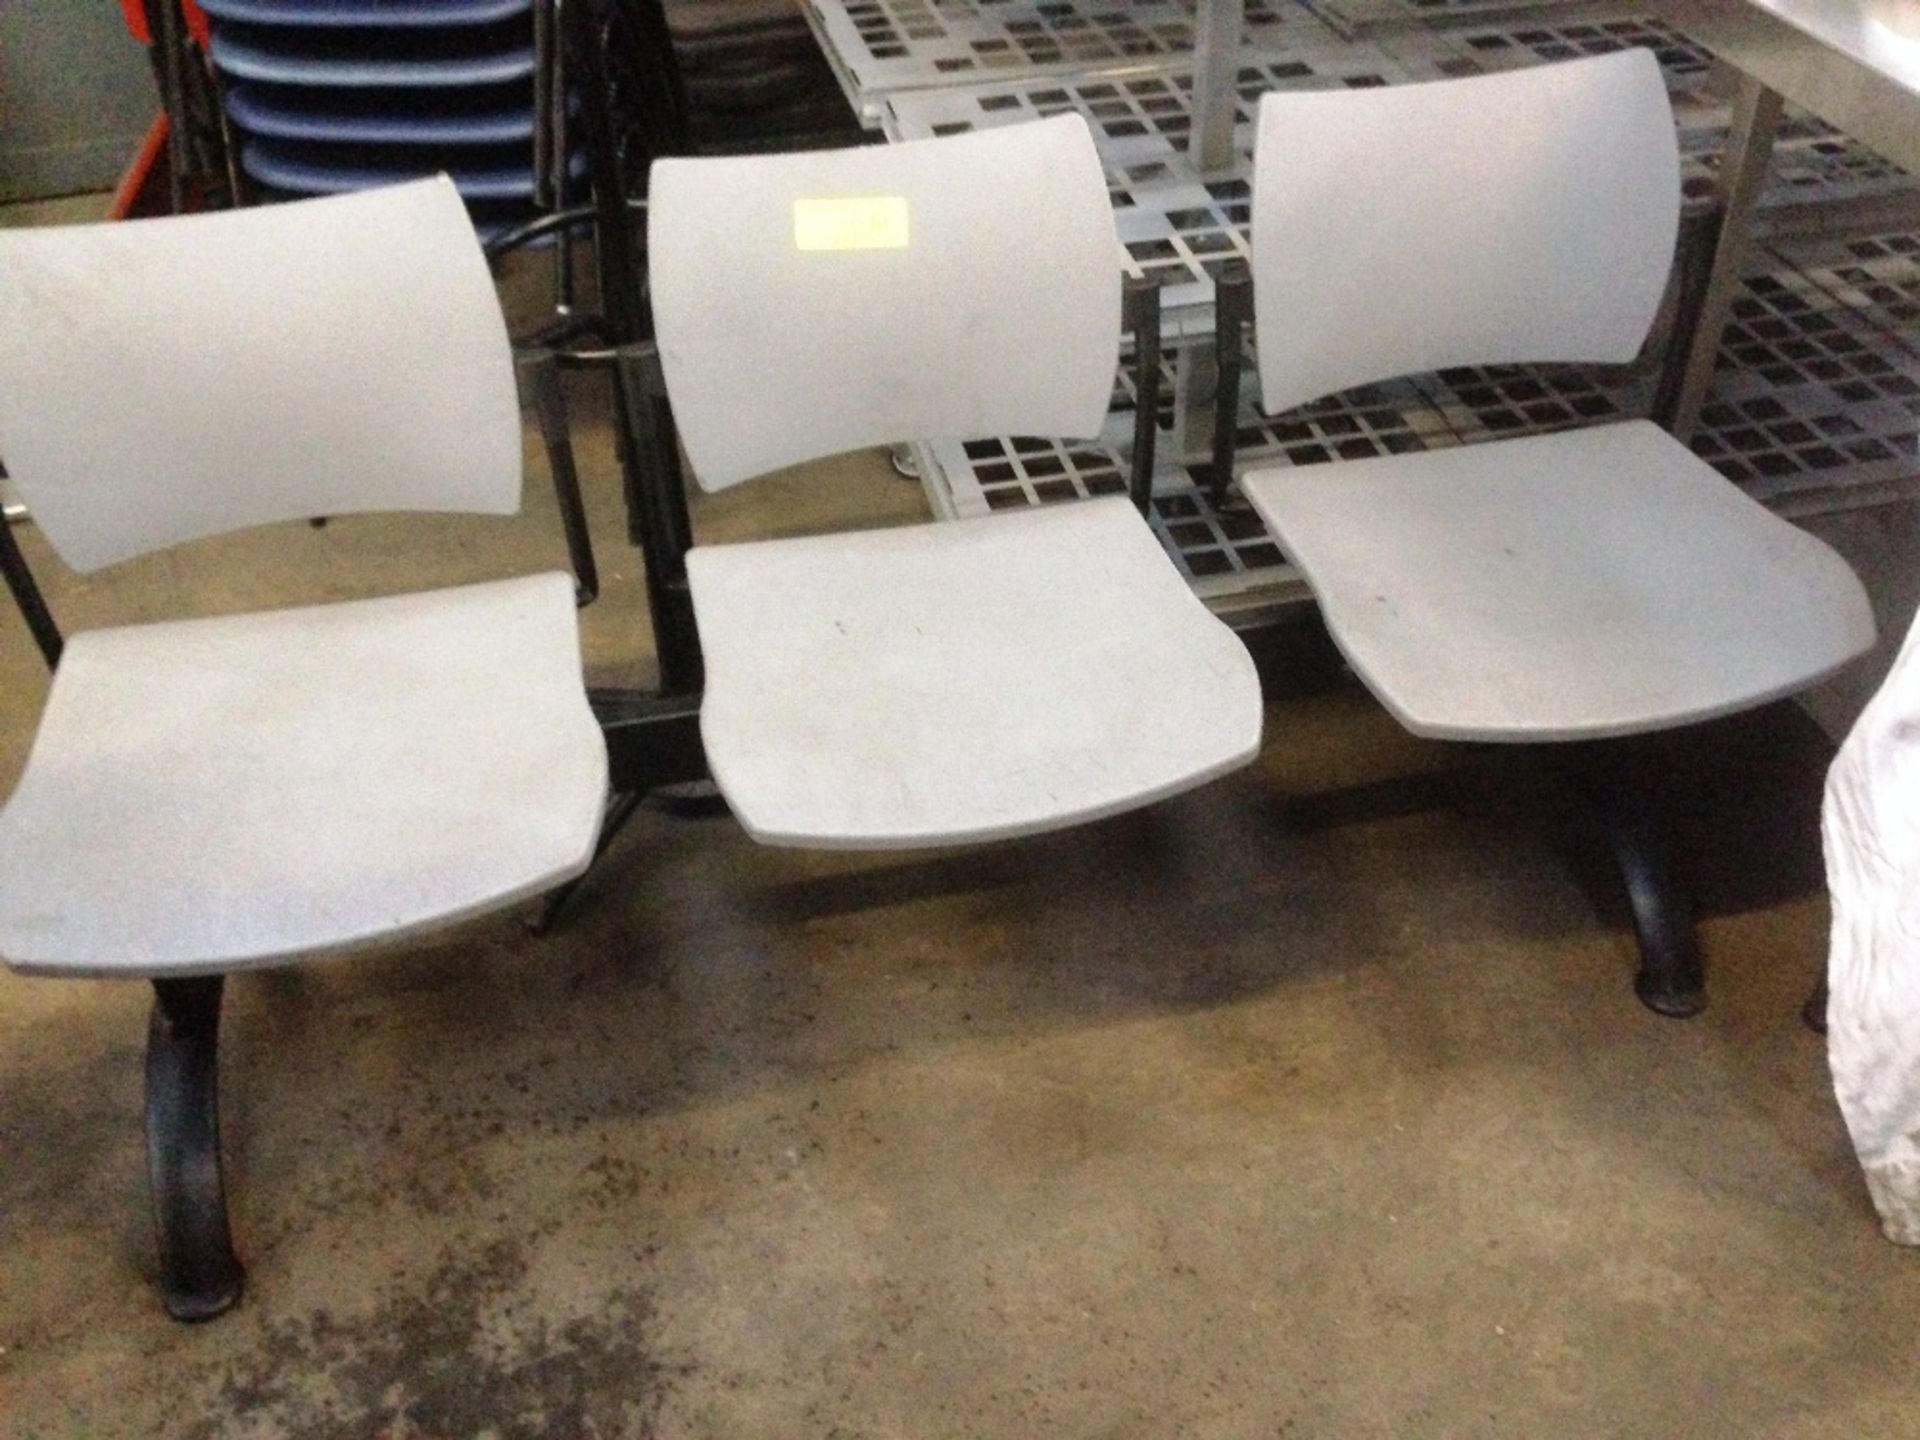 Bench seat with 3 chairs